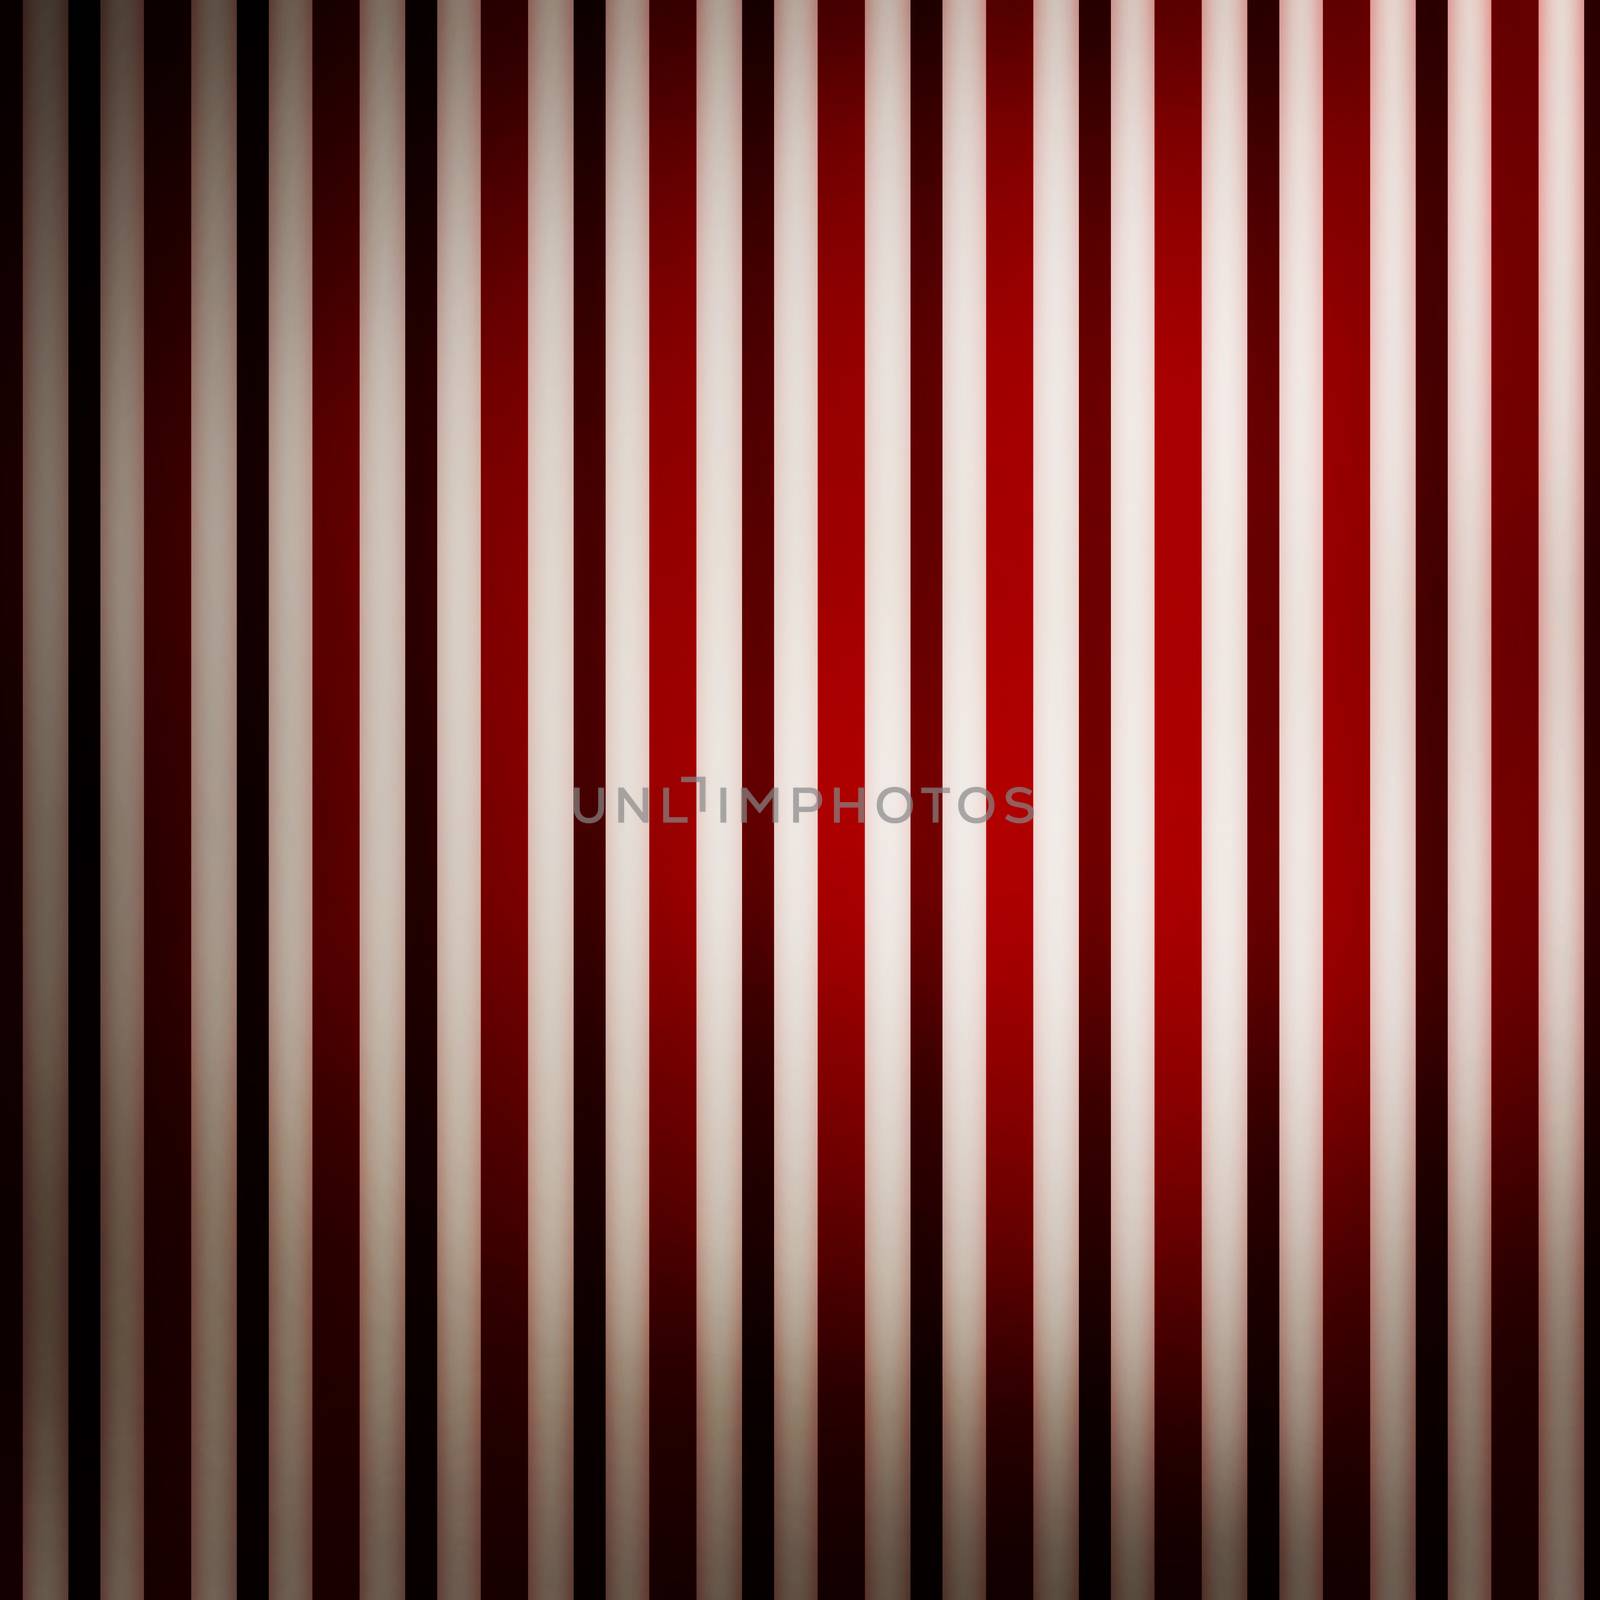 Red and white sriped background by melpomene